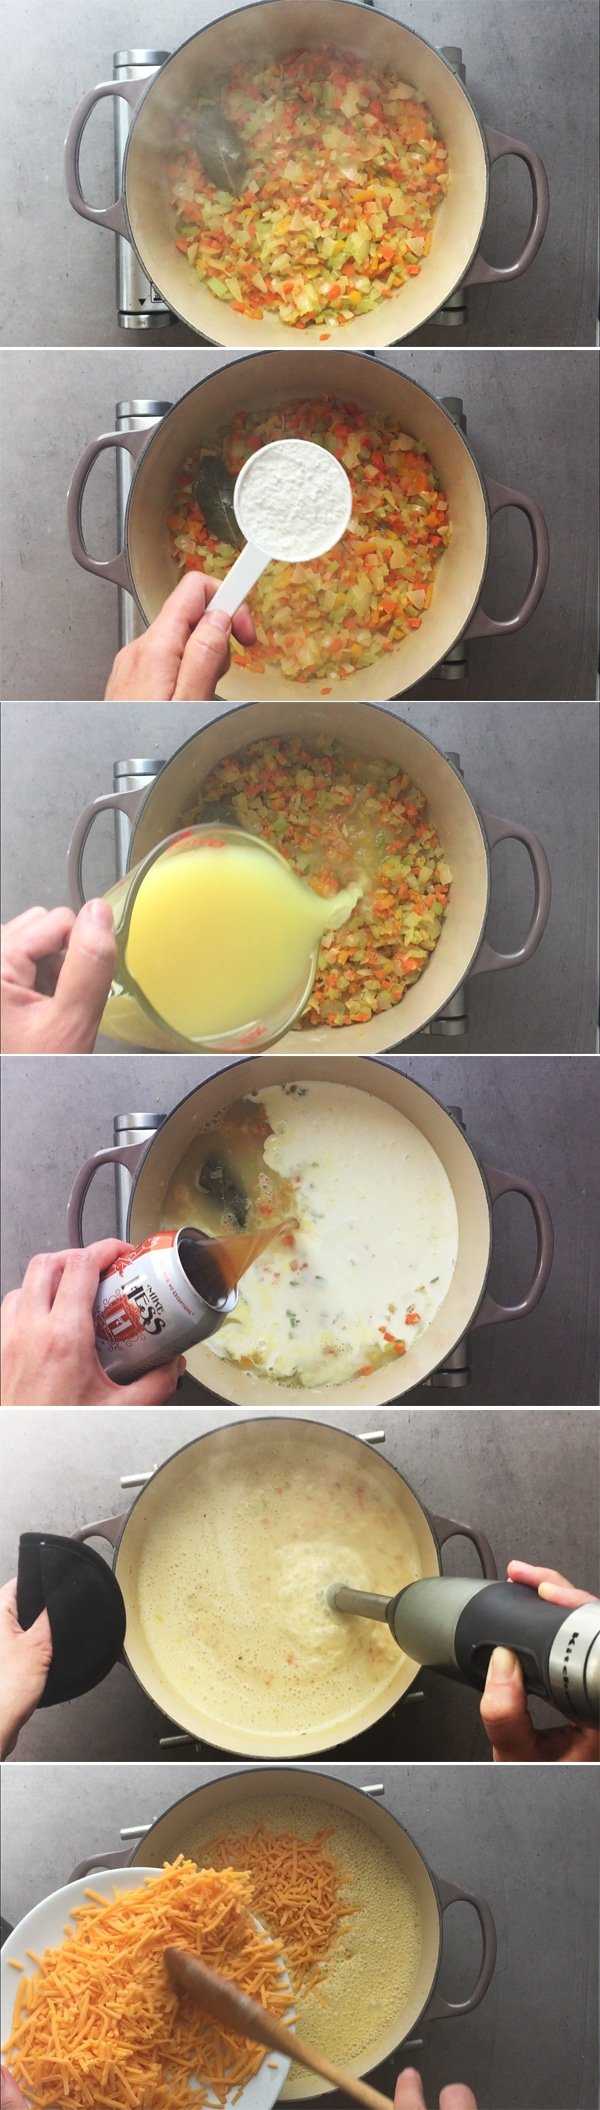 How to Make Beer Cheese Soup - Step by Step Process